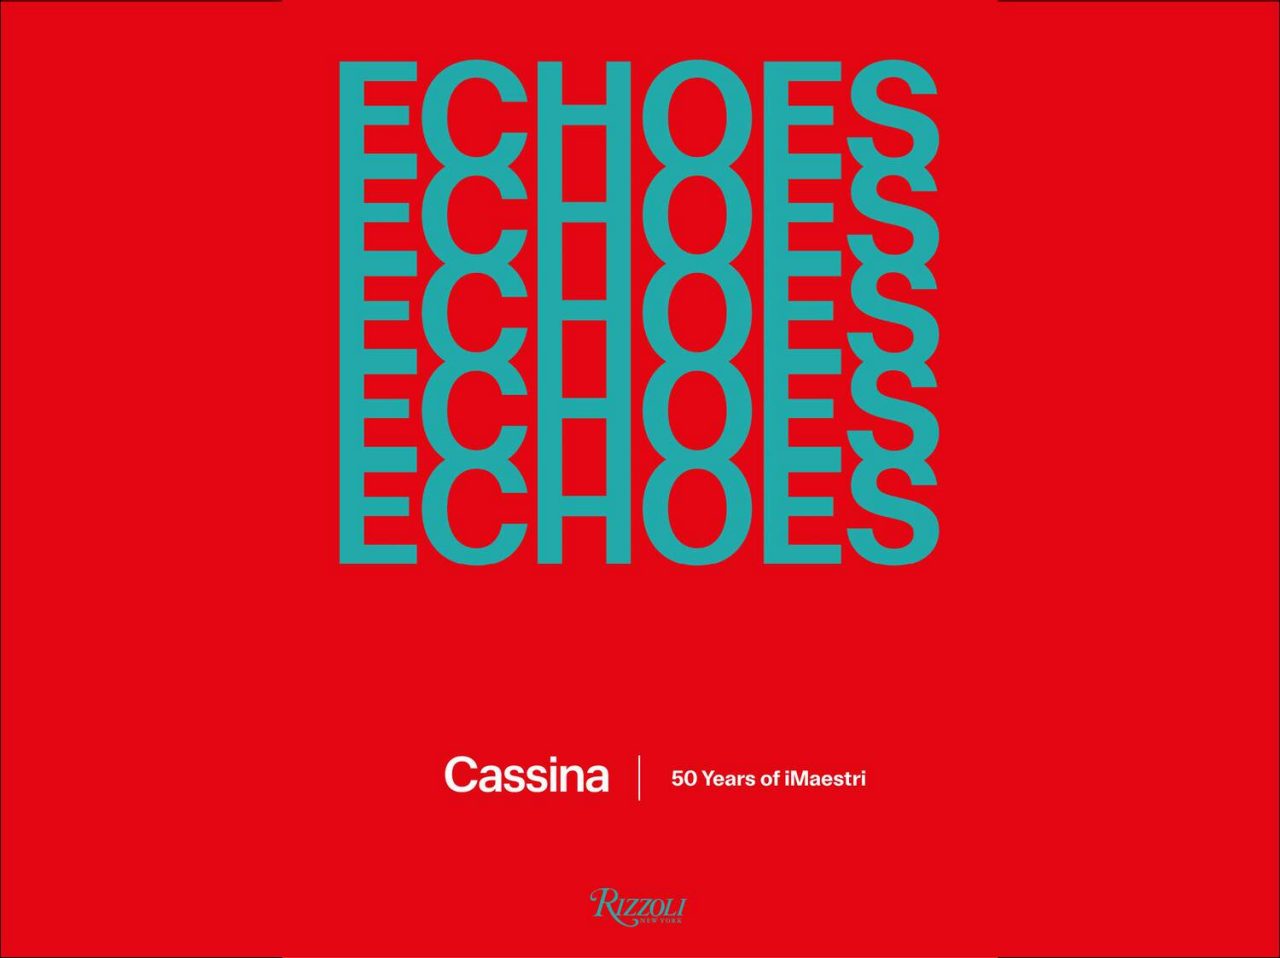 Couverture du livre « Echoes, Cassina. 50 Years of iMaestri »